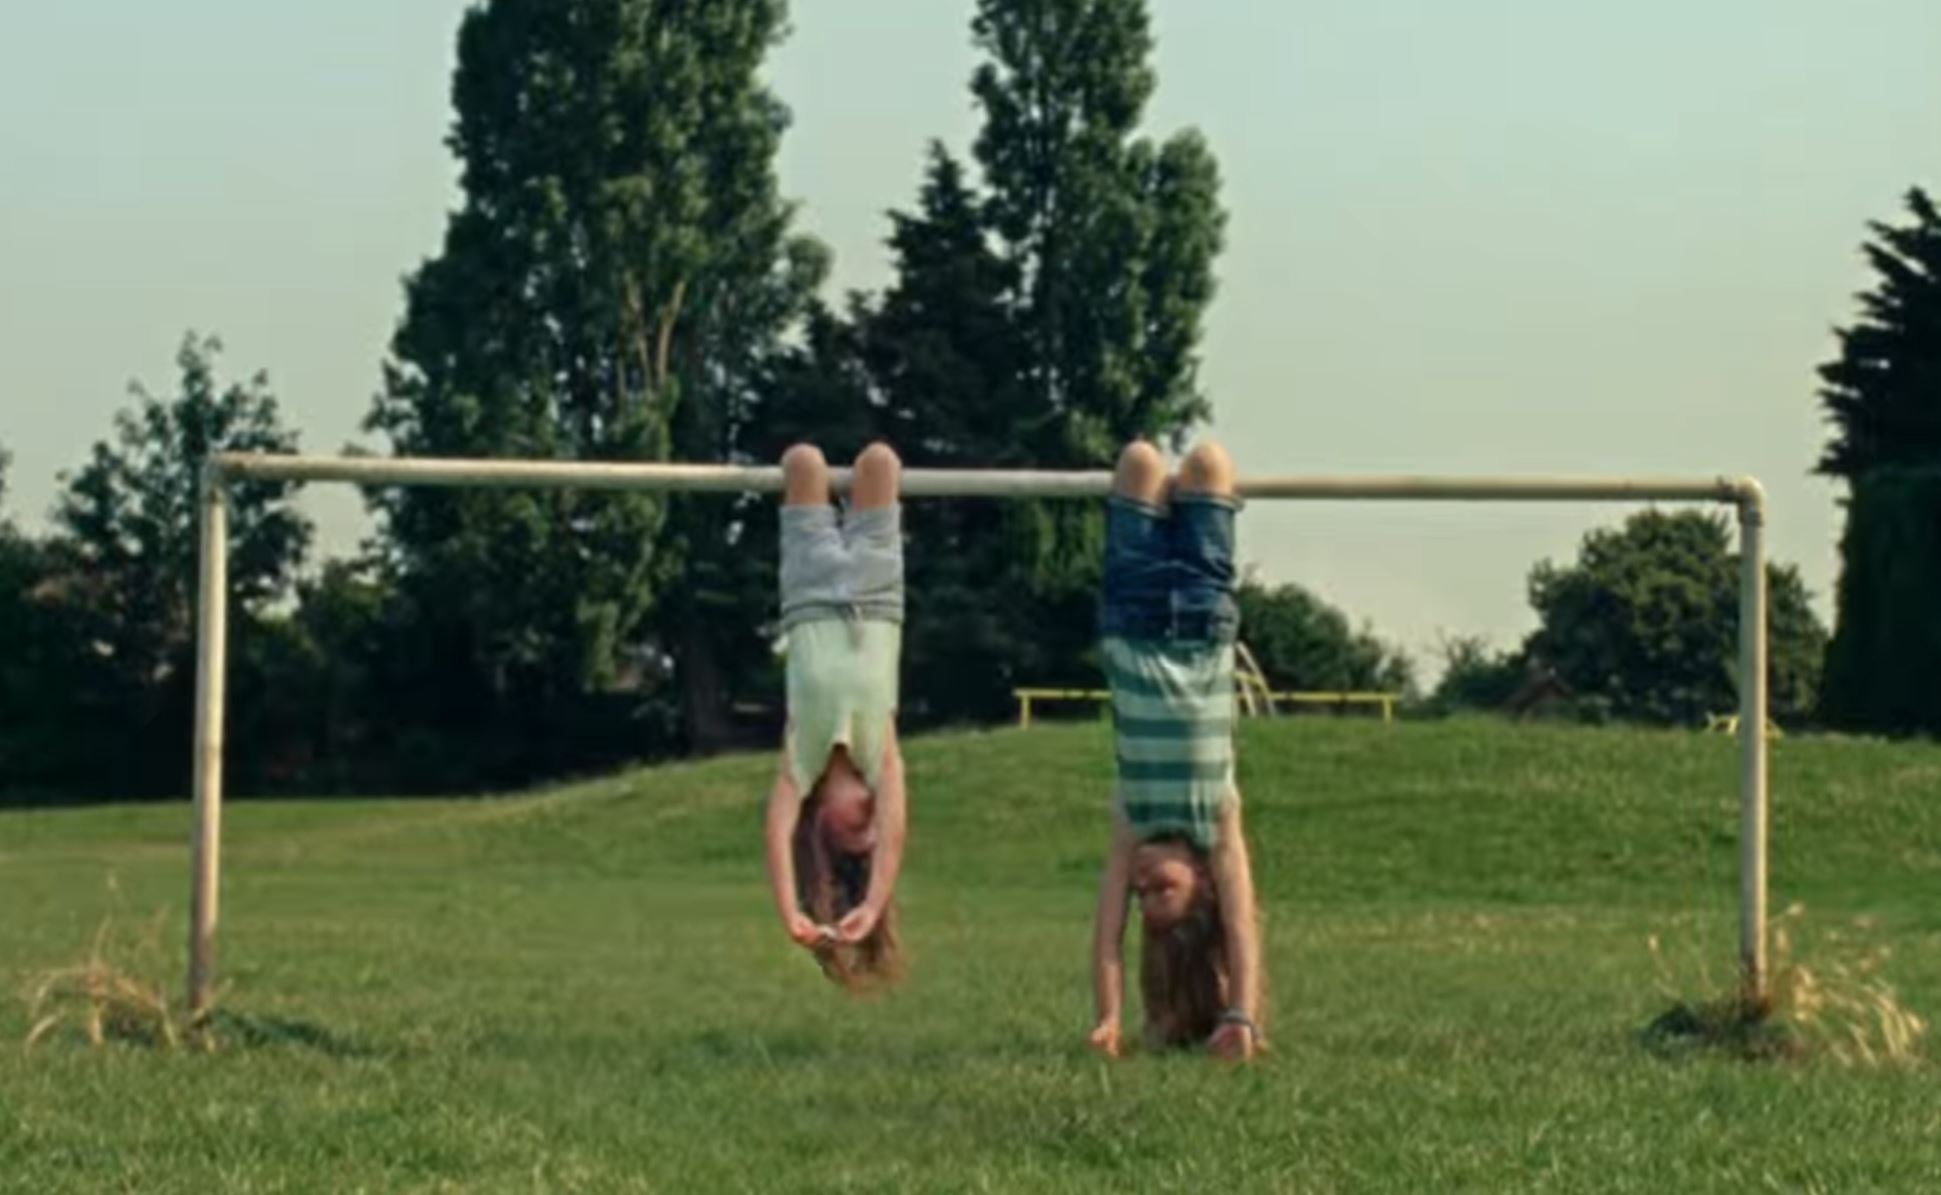 Dairylea owner Mondelez UK said the ad’s purpose was to show parents allowing their children more freedom